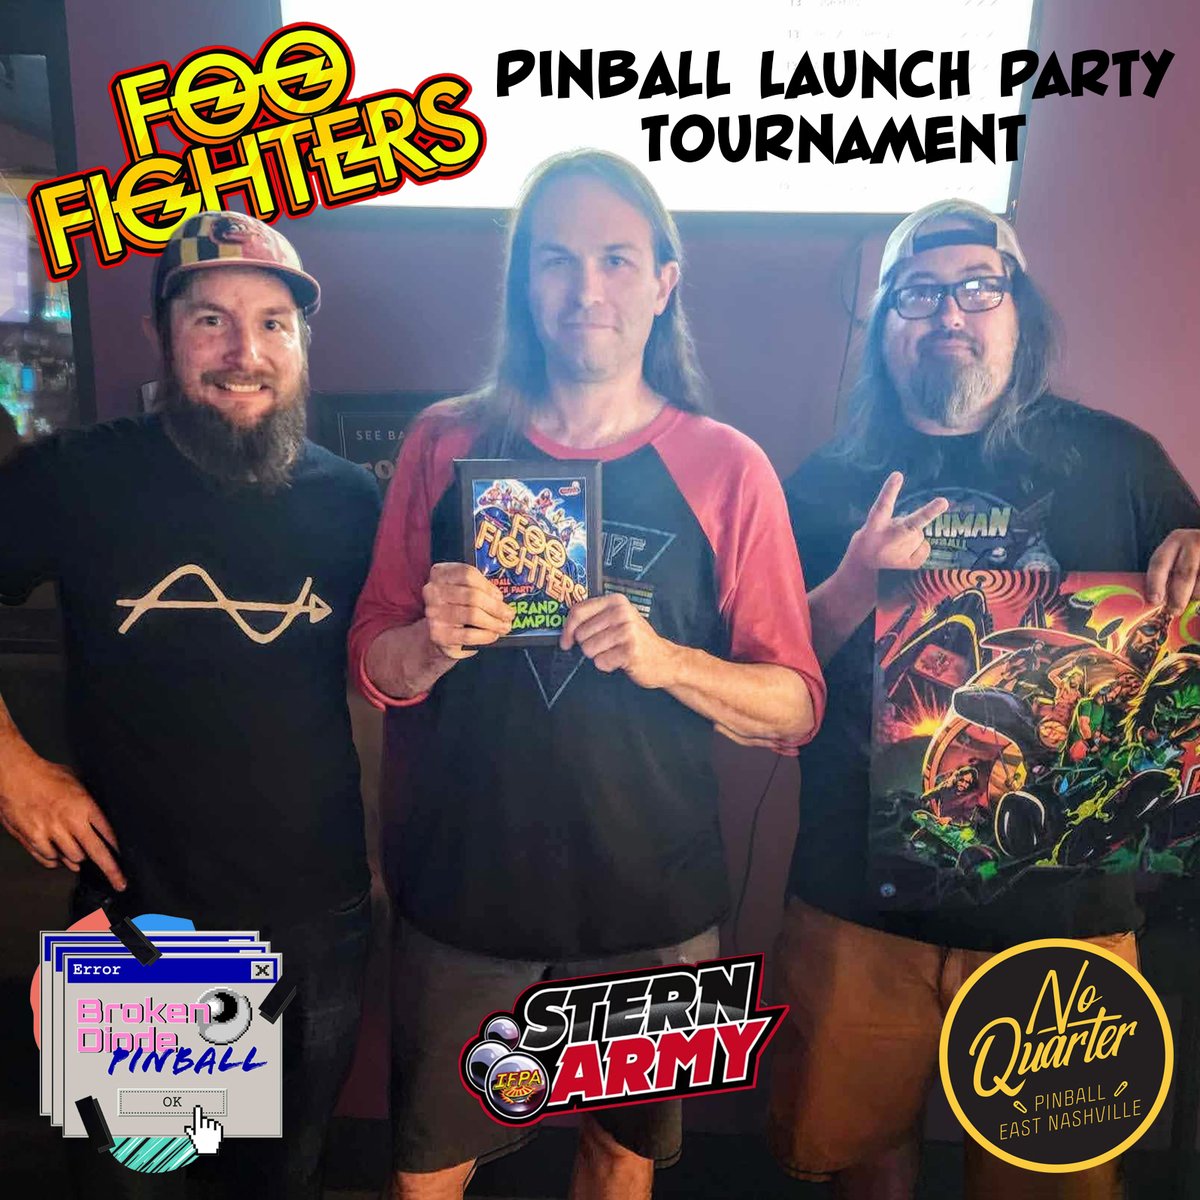 Congrats to the winners of No Quarter #FooFighters Pinball Launch Party. Check out Broken Diode Pinball on Twitch.tv/broken_diode for the full replay! 
1st - Jason Wilson
2nd - Justin Fitzgerald
3rd - Matthew Malkus
#pinball #sternpinball #sternarmy #pinballtournament